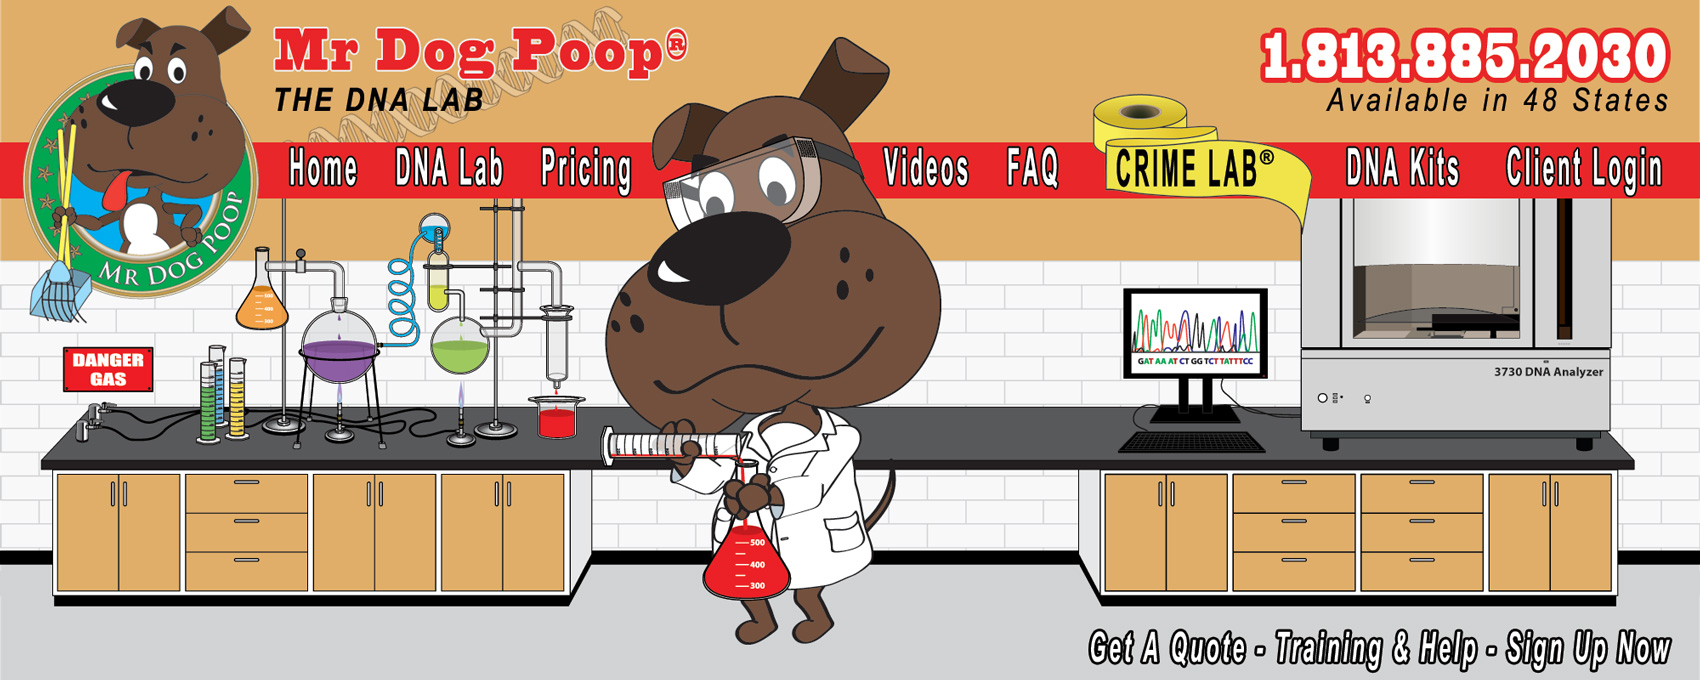 How Accurate Is Dog Poop DNA Testing?